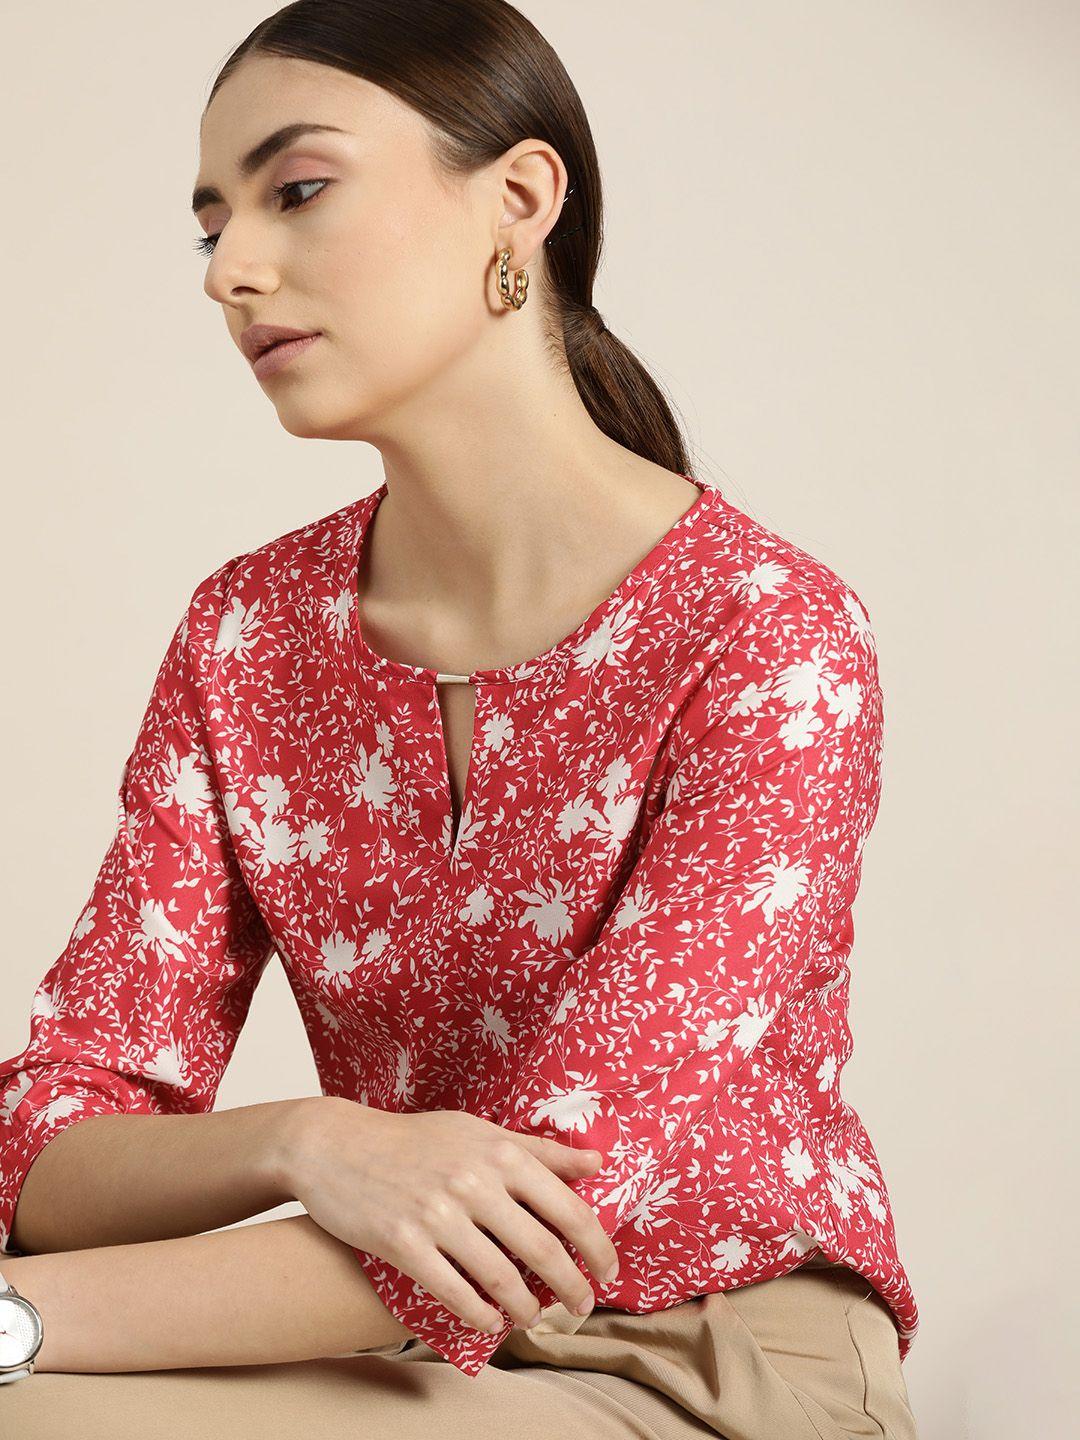 her-by-invictus-red-&-white-floral-print-keyhole-neck-top